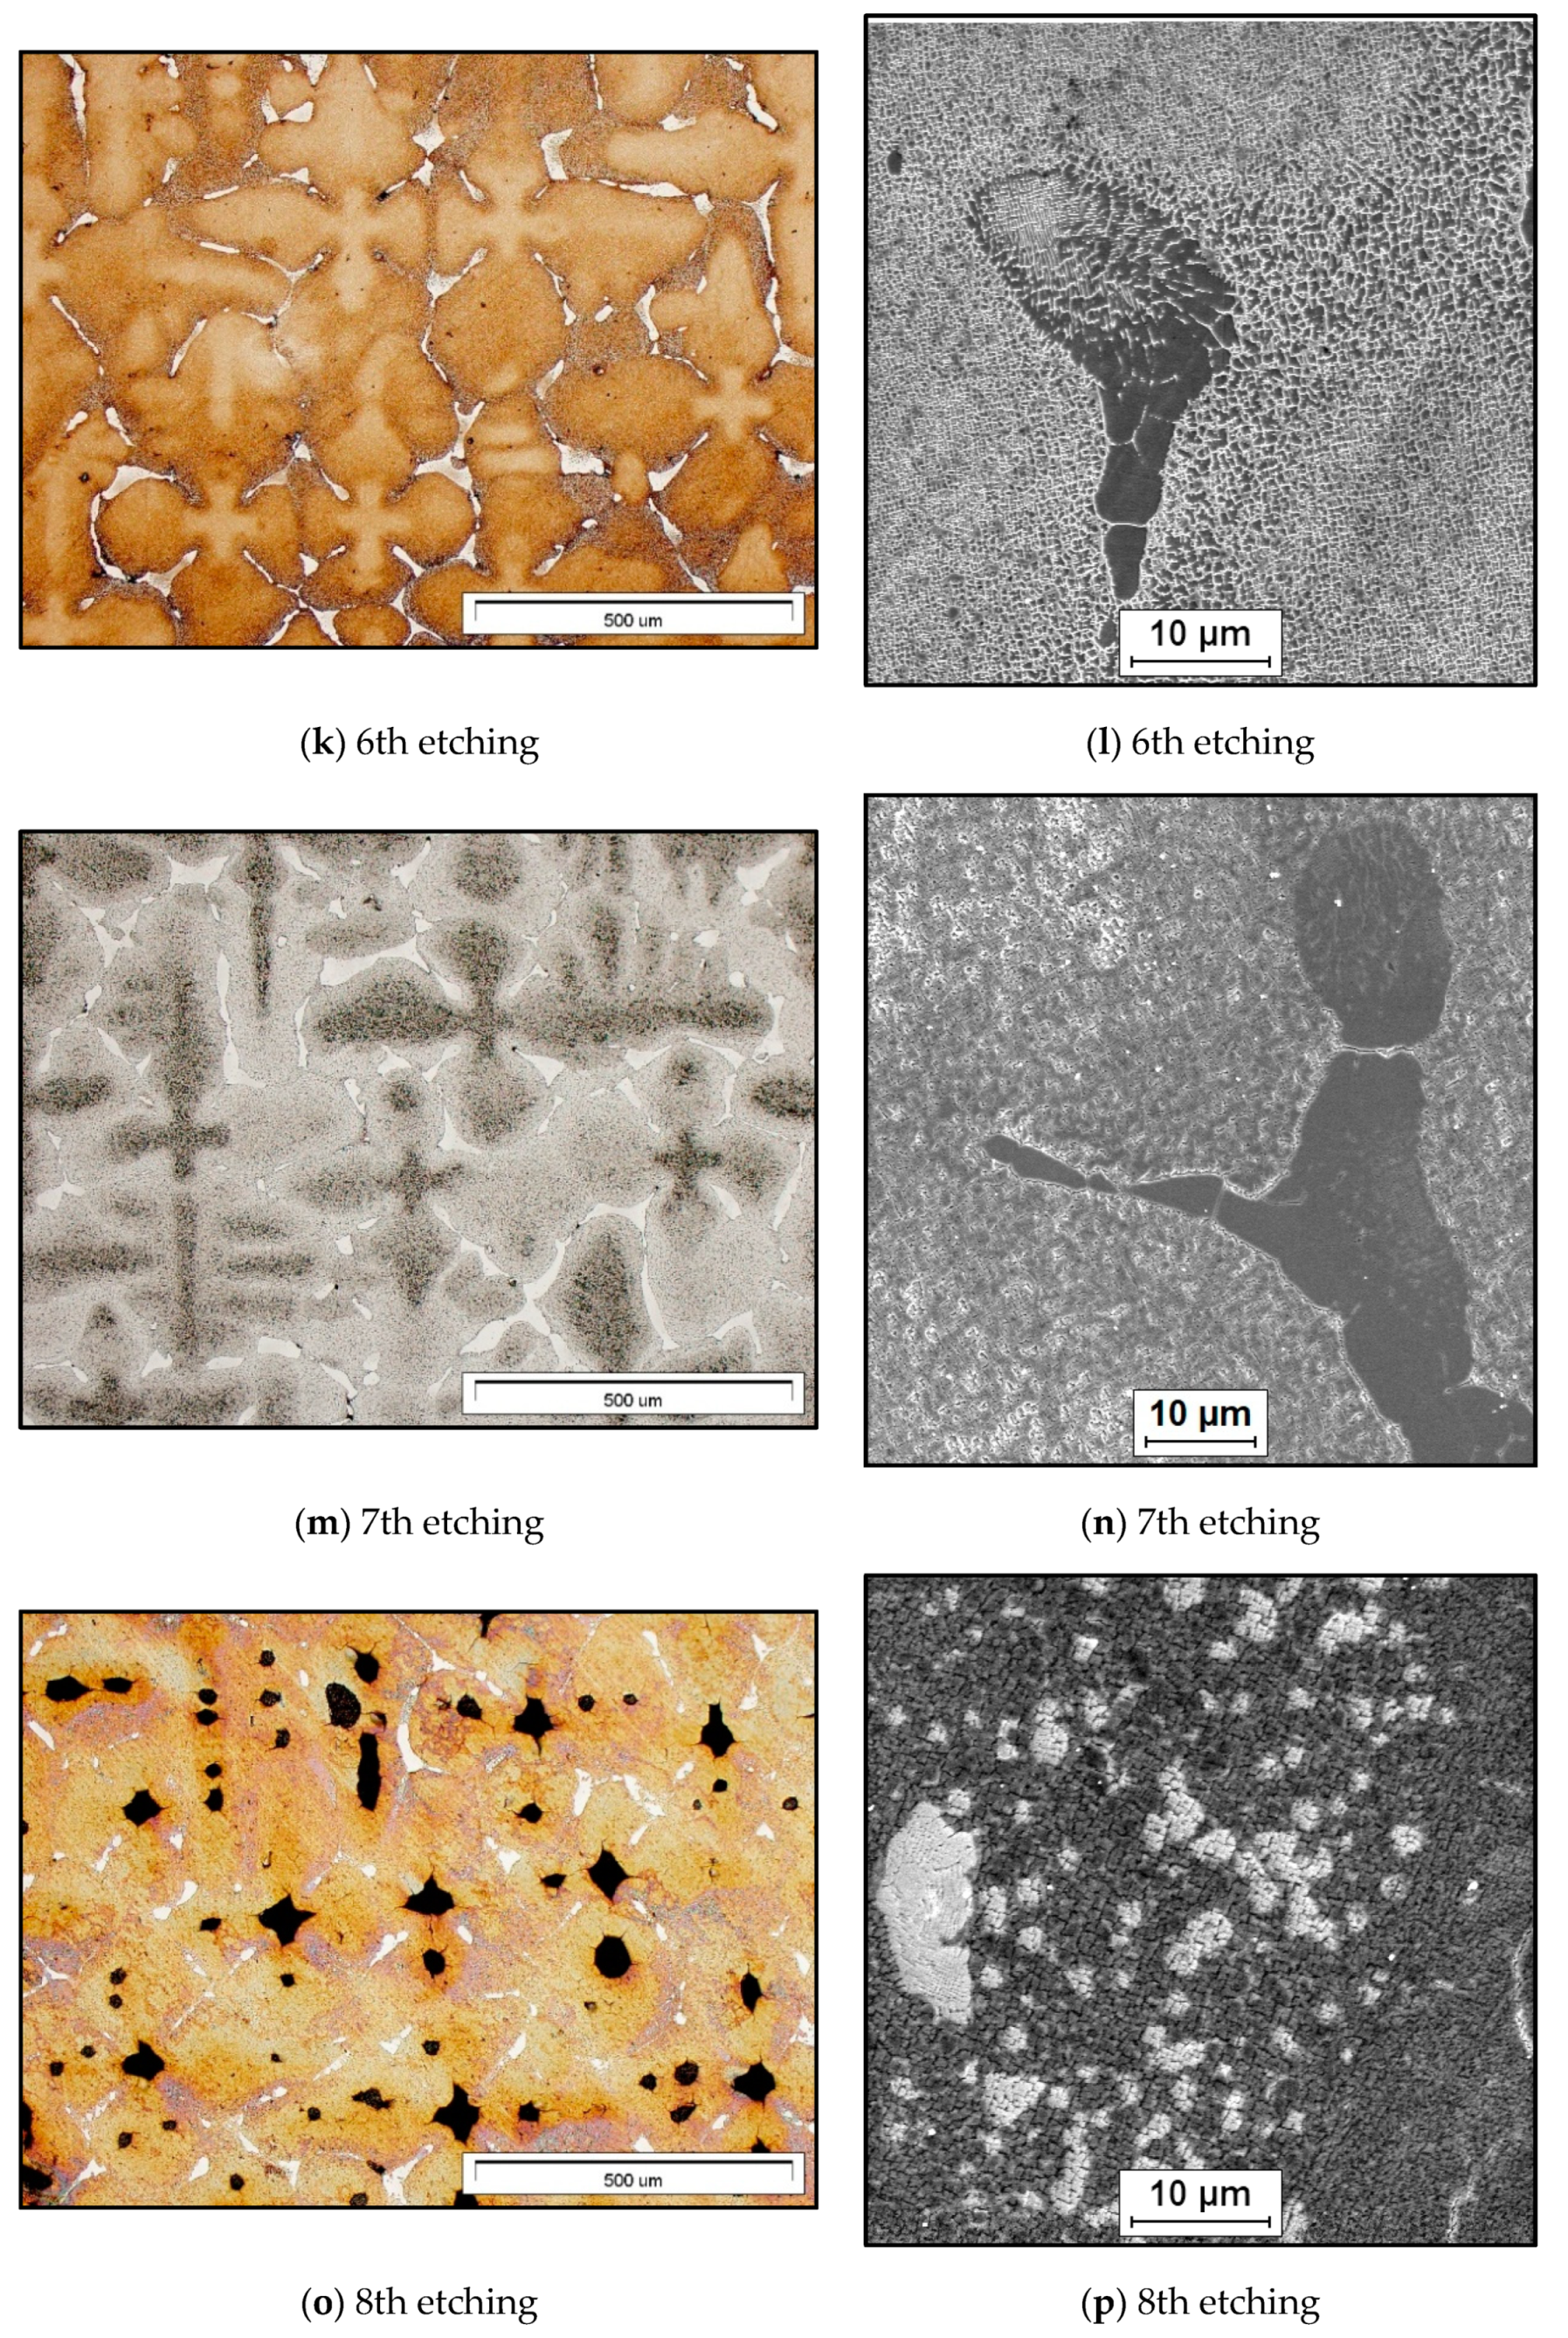 Materials Free Full Text Methodology For Revealing The Phases And Microstructural Constituents Of The Cmsx 4 Nickel Based Superalloy Implicating Their Computer Aided Detection For Image Analysis